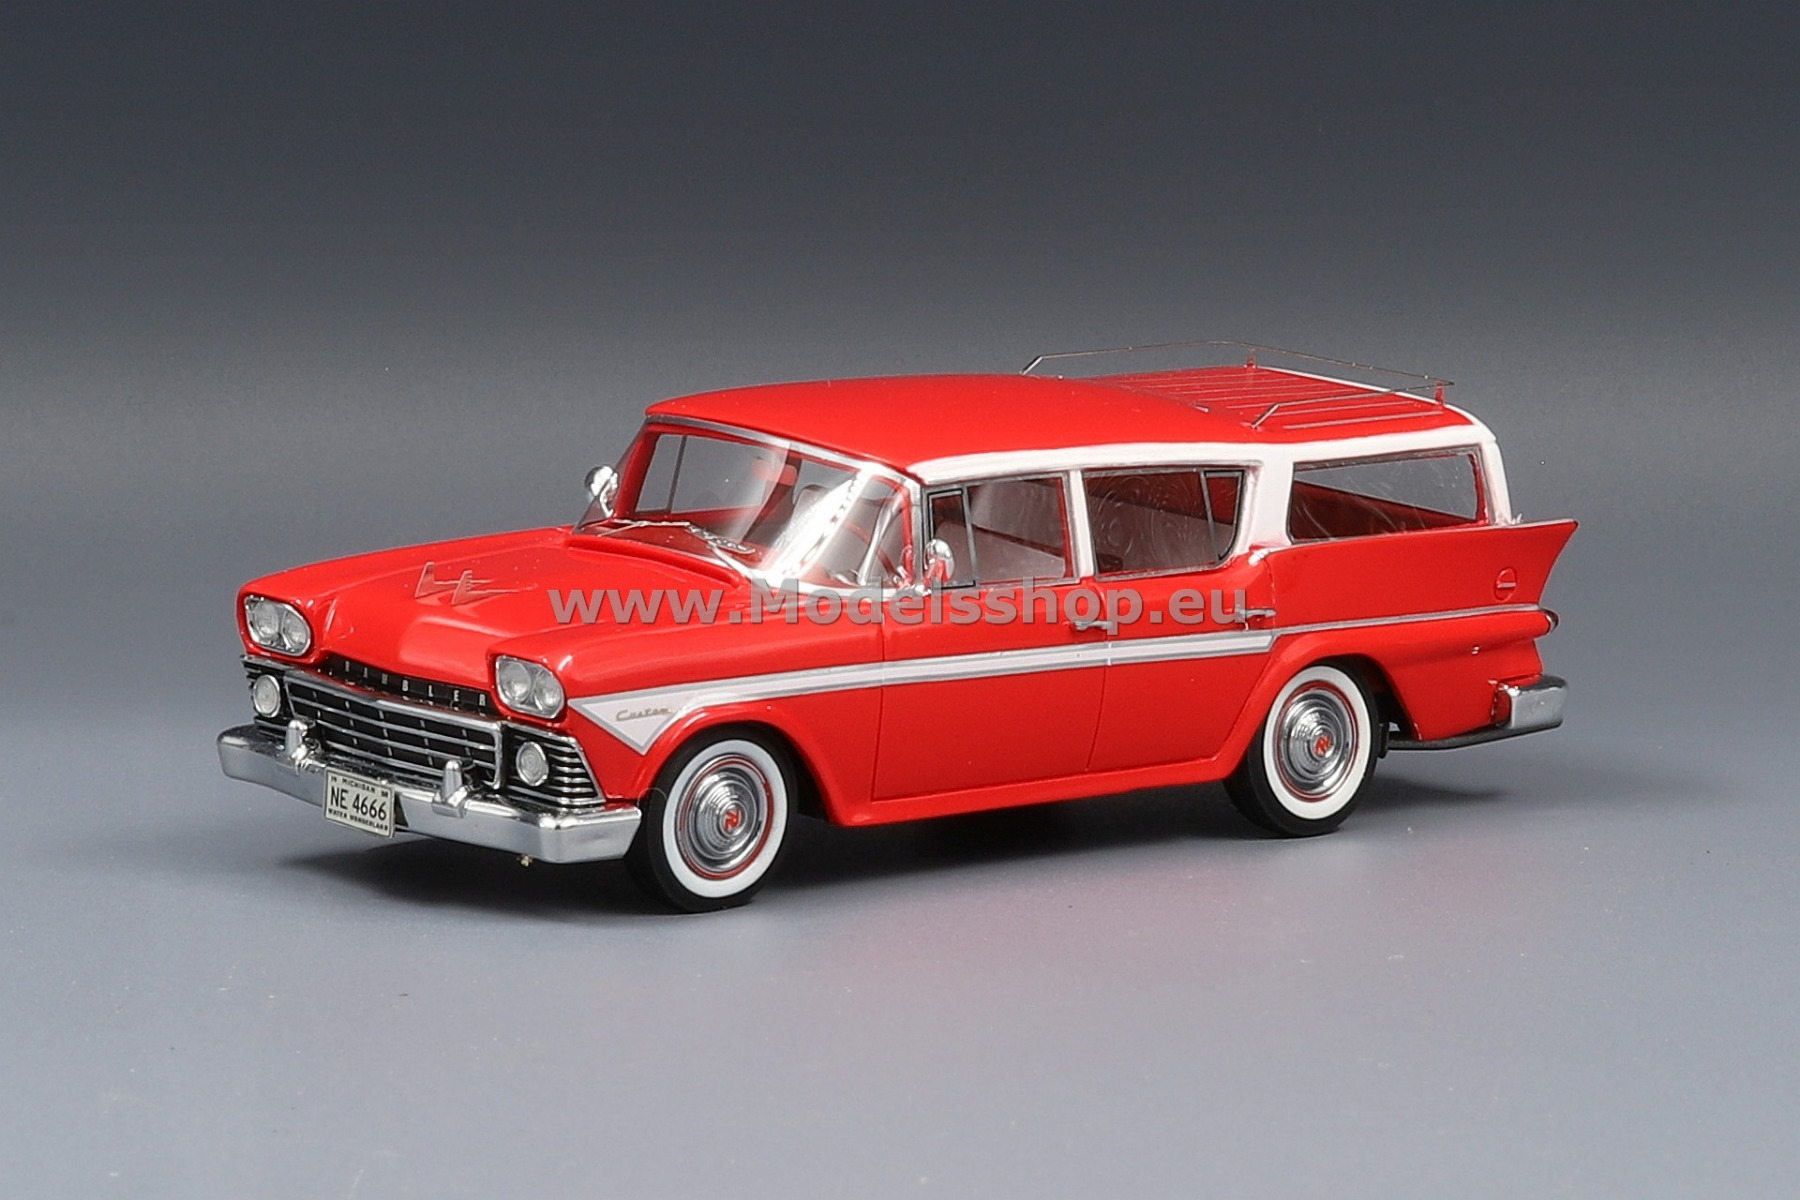 Rambler Customs Cross Country 6 Station Wagon, 1958 /red - white/